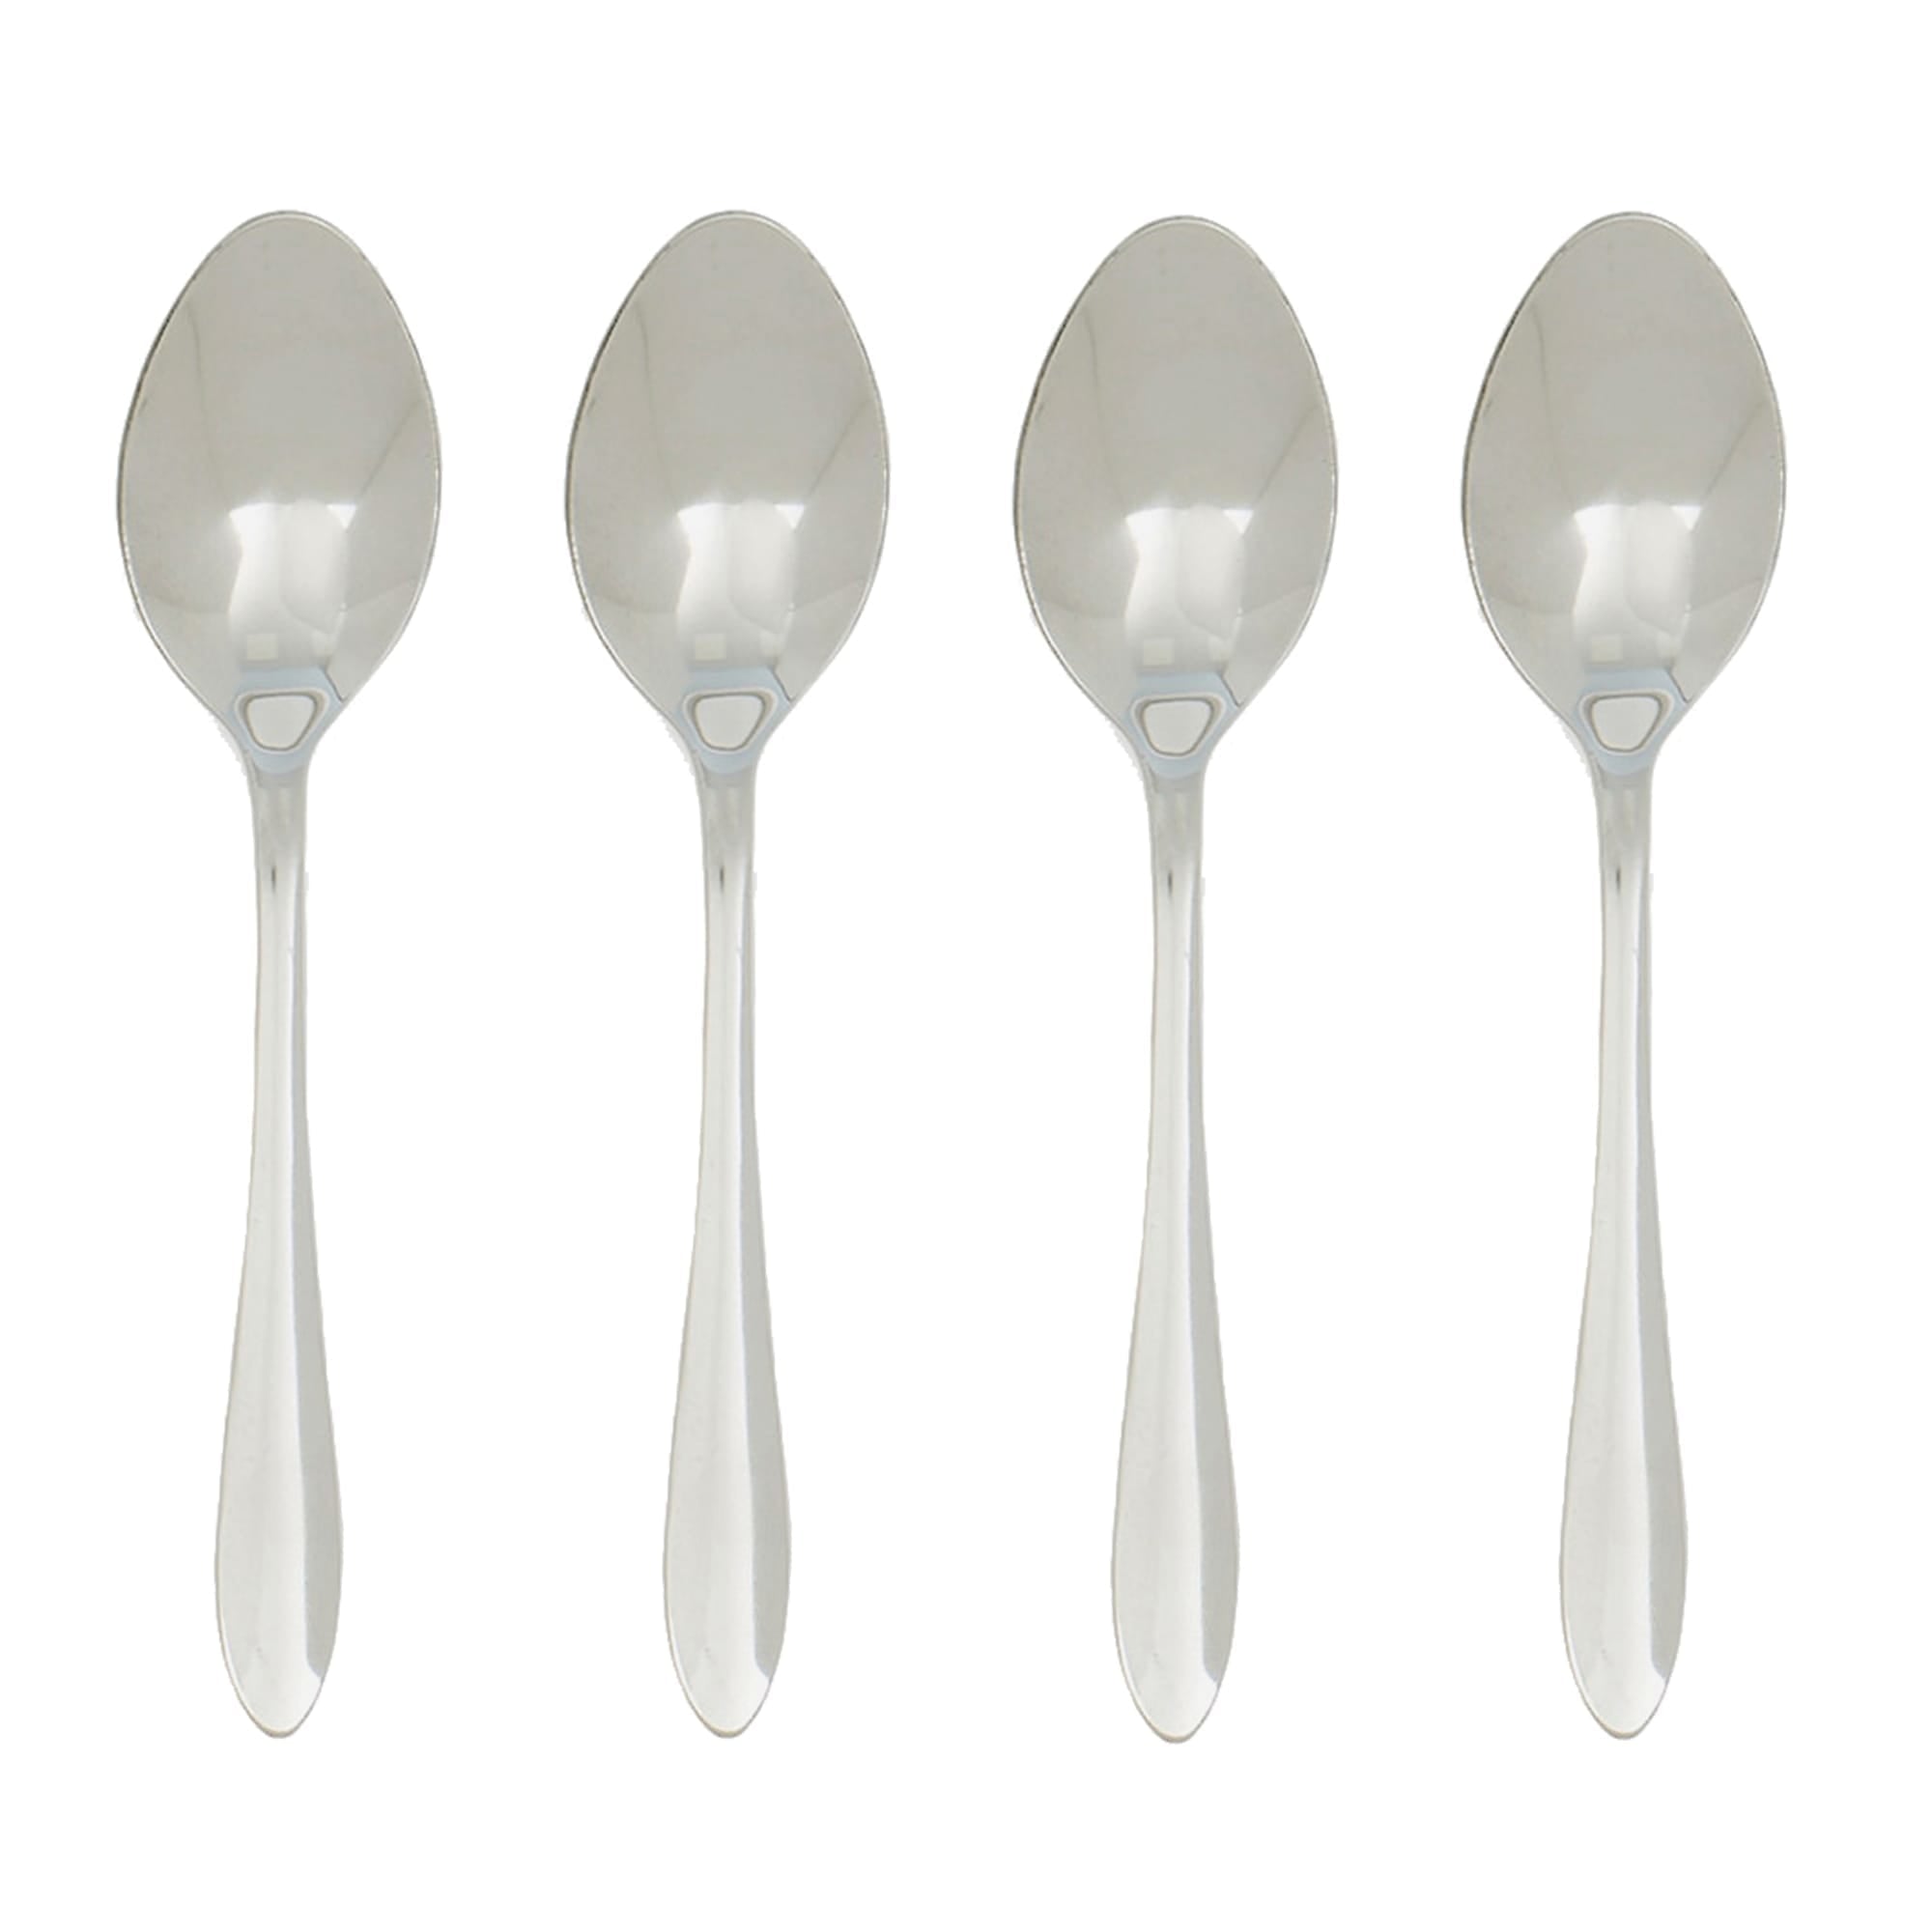 Home Basics 4 Piece Stainless Steel Dinner Spoons, Silver $2.00 EACH, CASE PACK OF 24